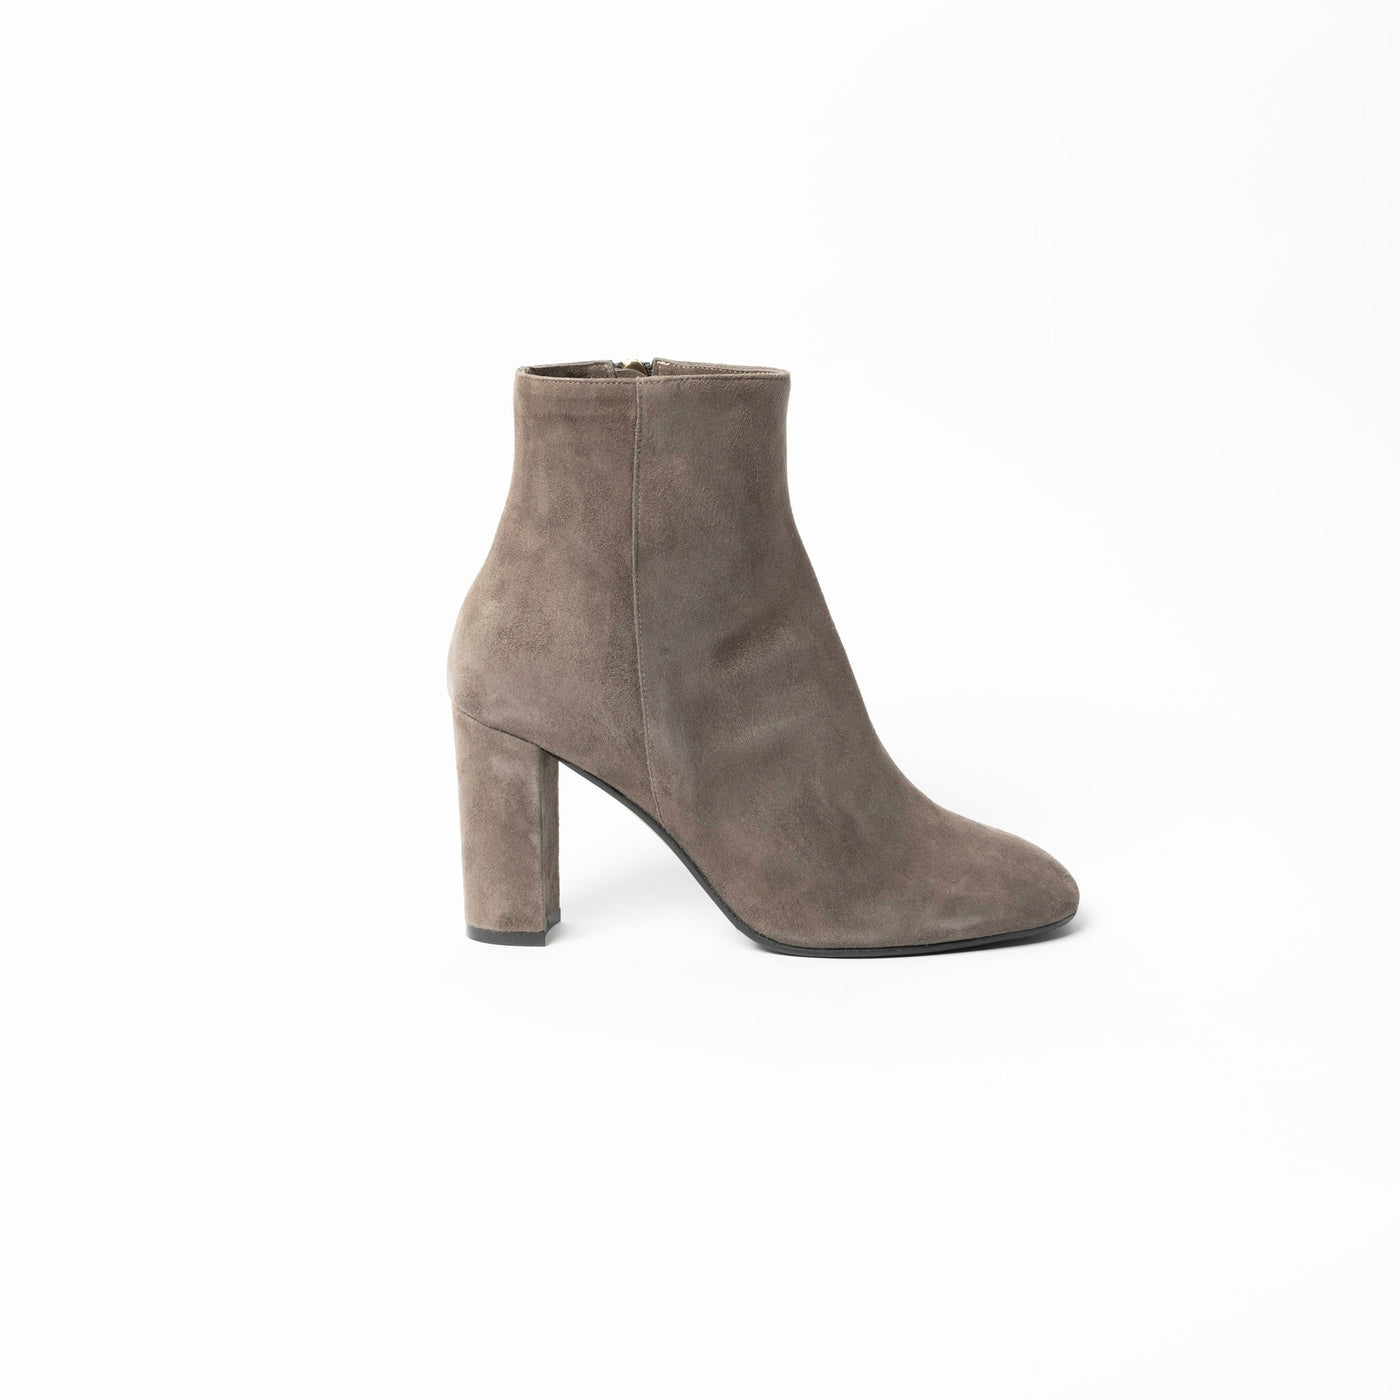 Grey ankle boots with block heel. 